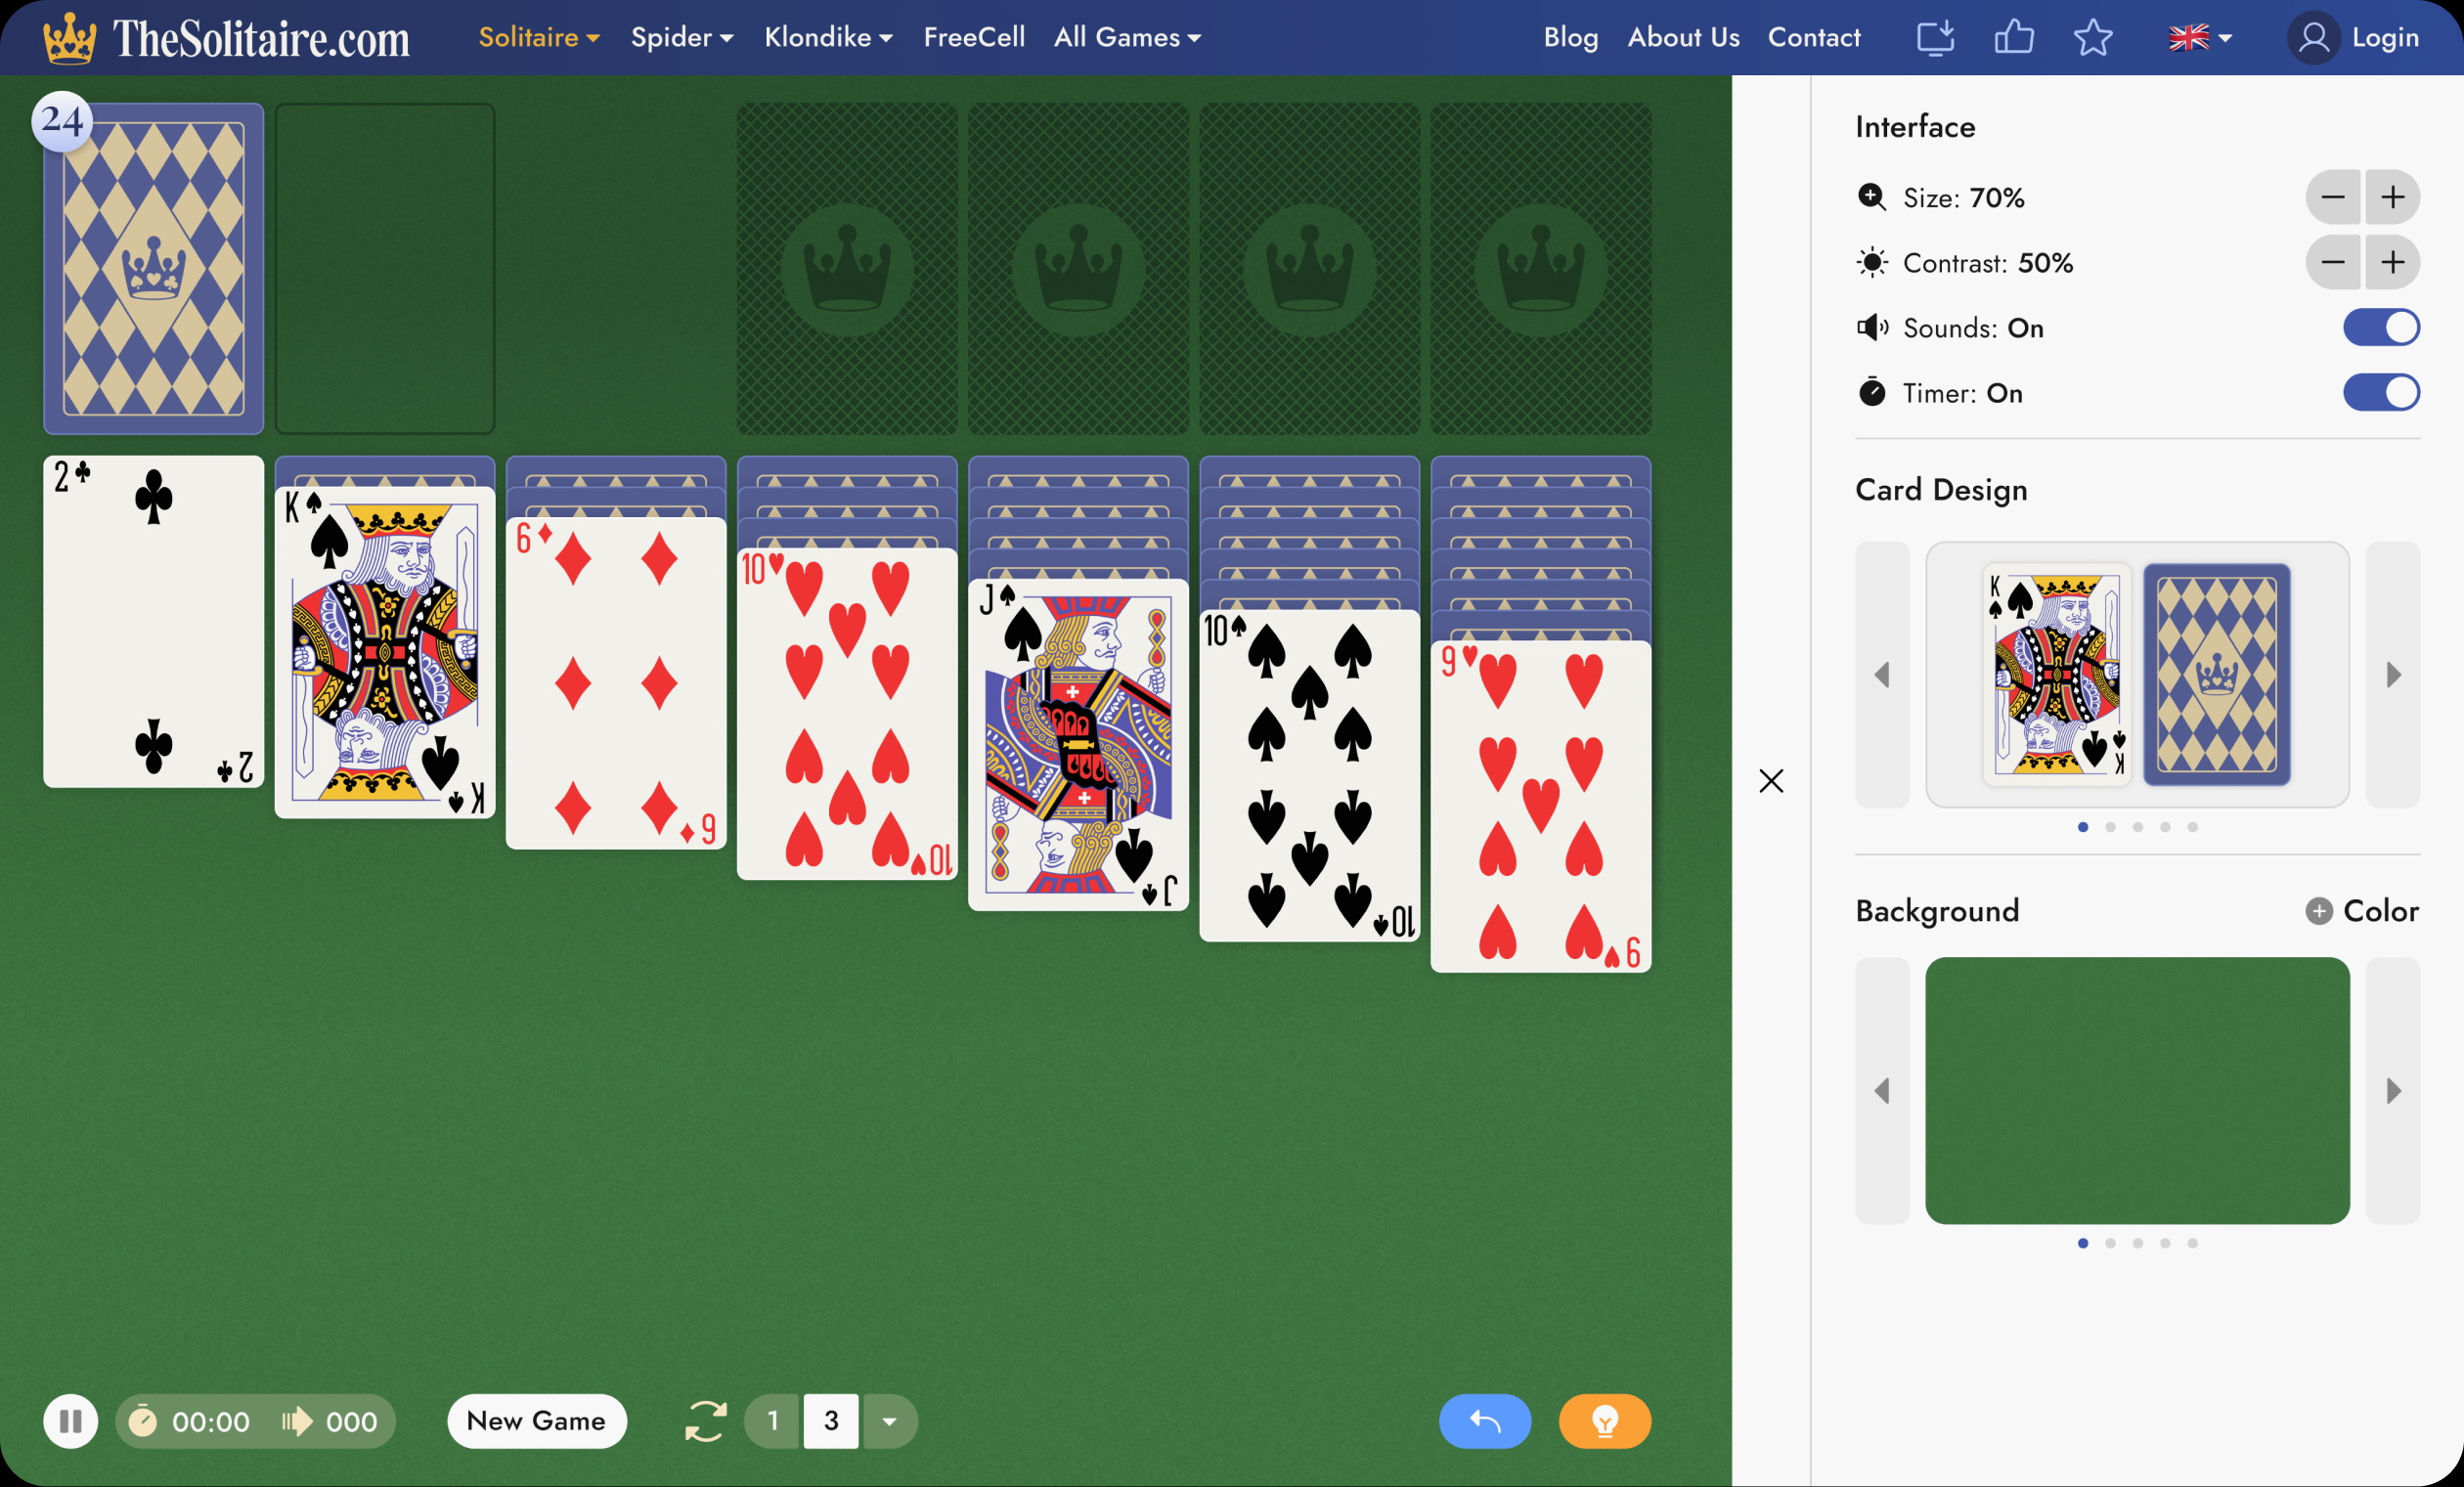 How To Customize Decks On TheSolitaire.com